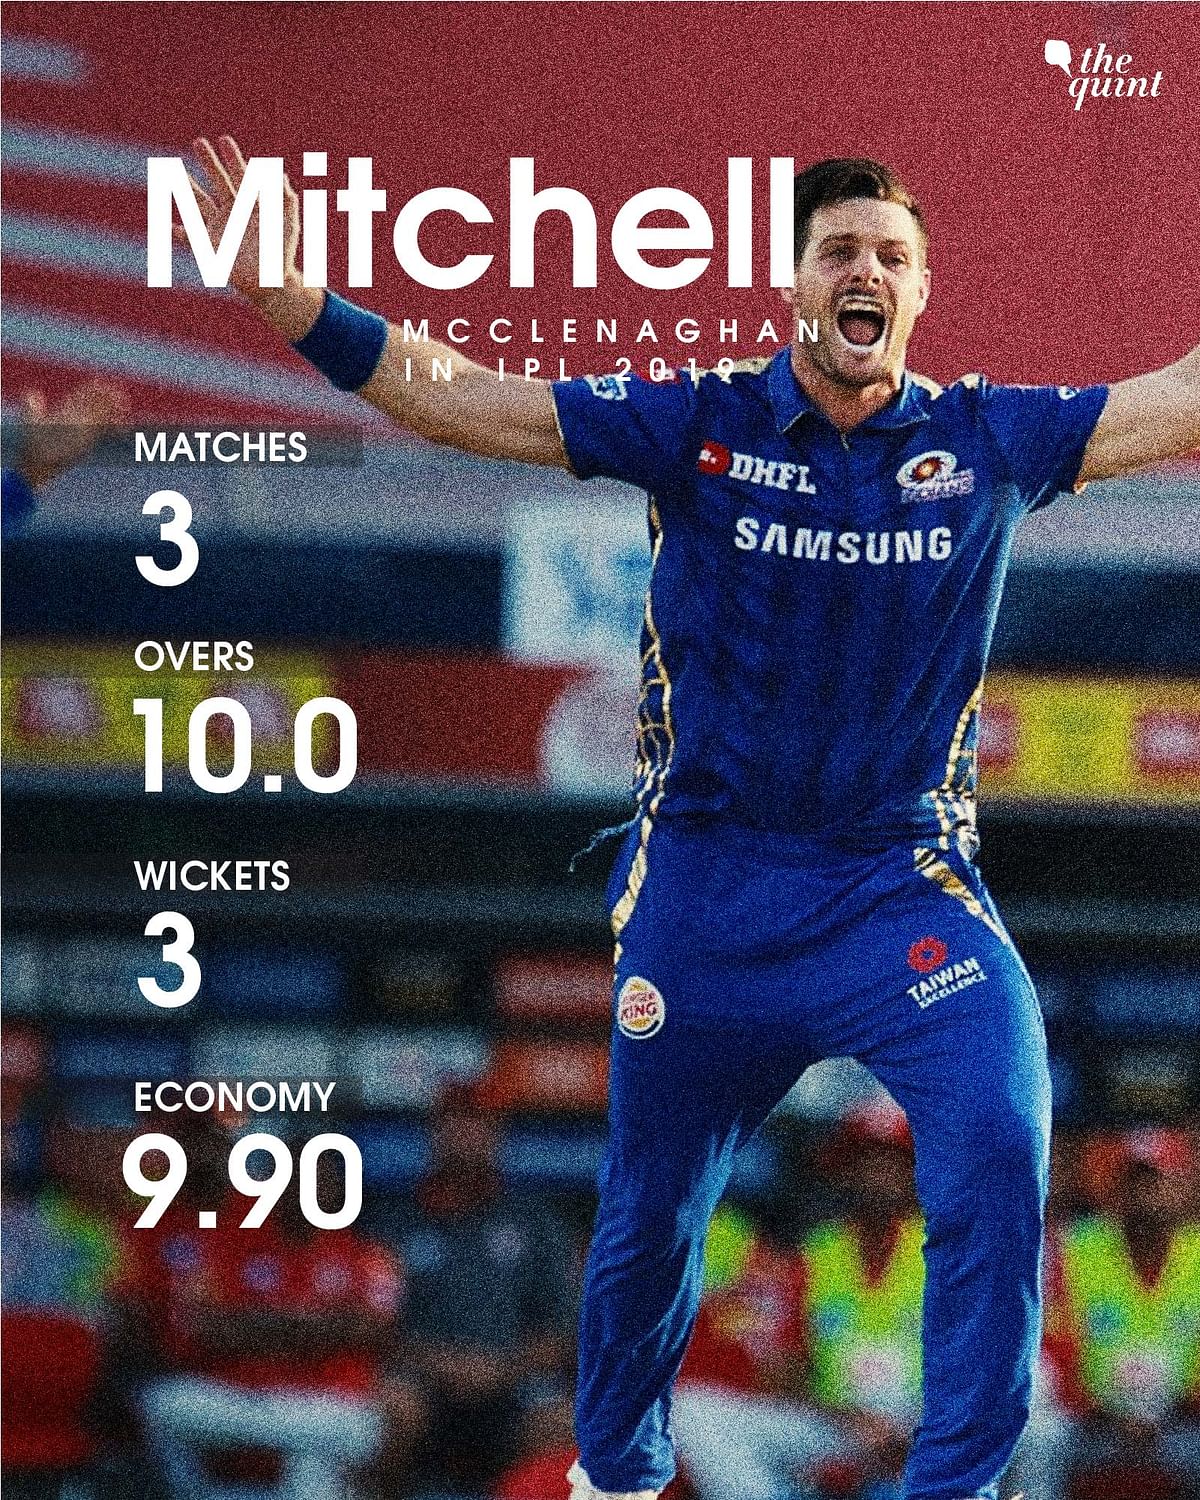 Here’s a look at the four most expensive bowlers in the current edition of the IPL.